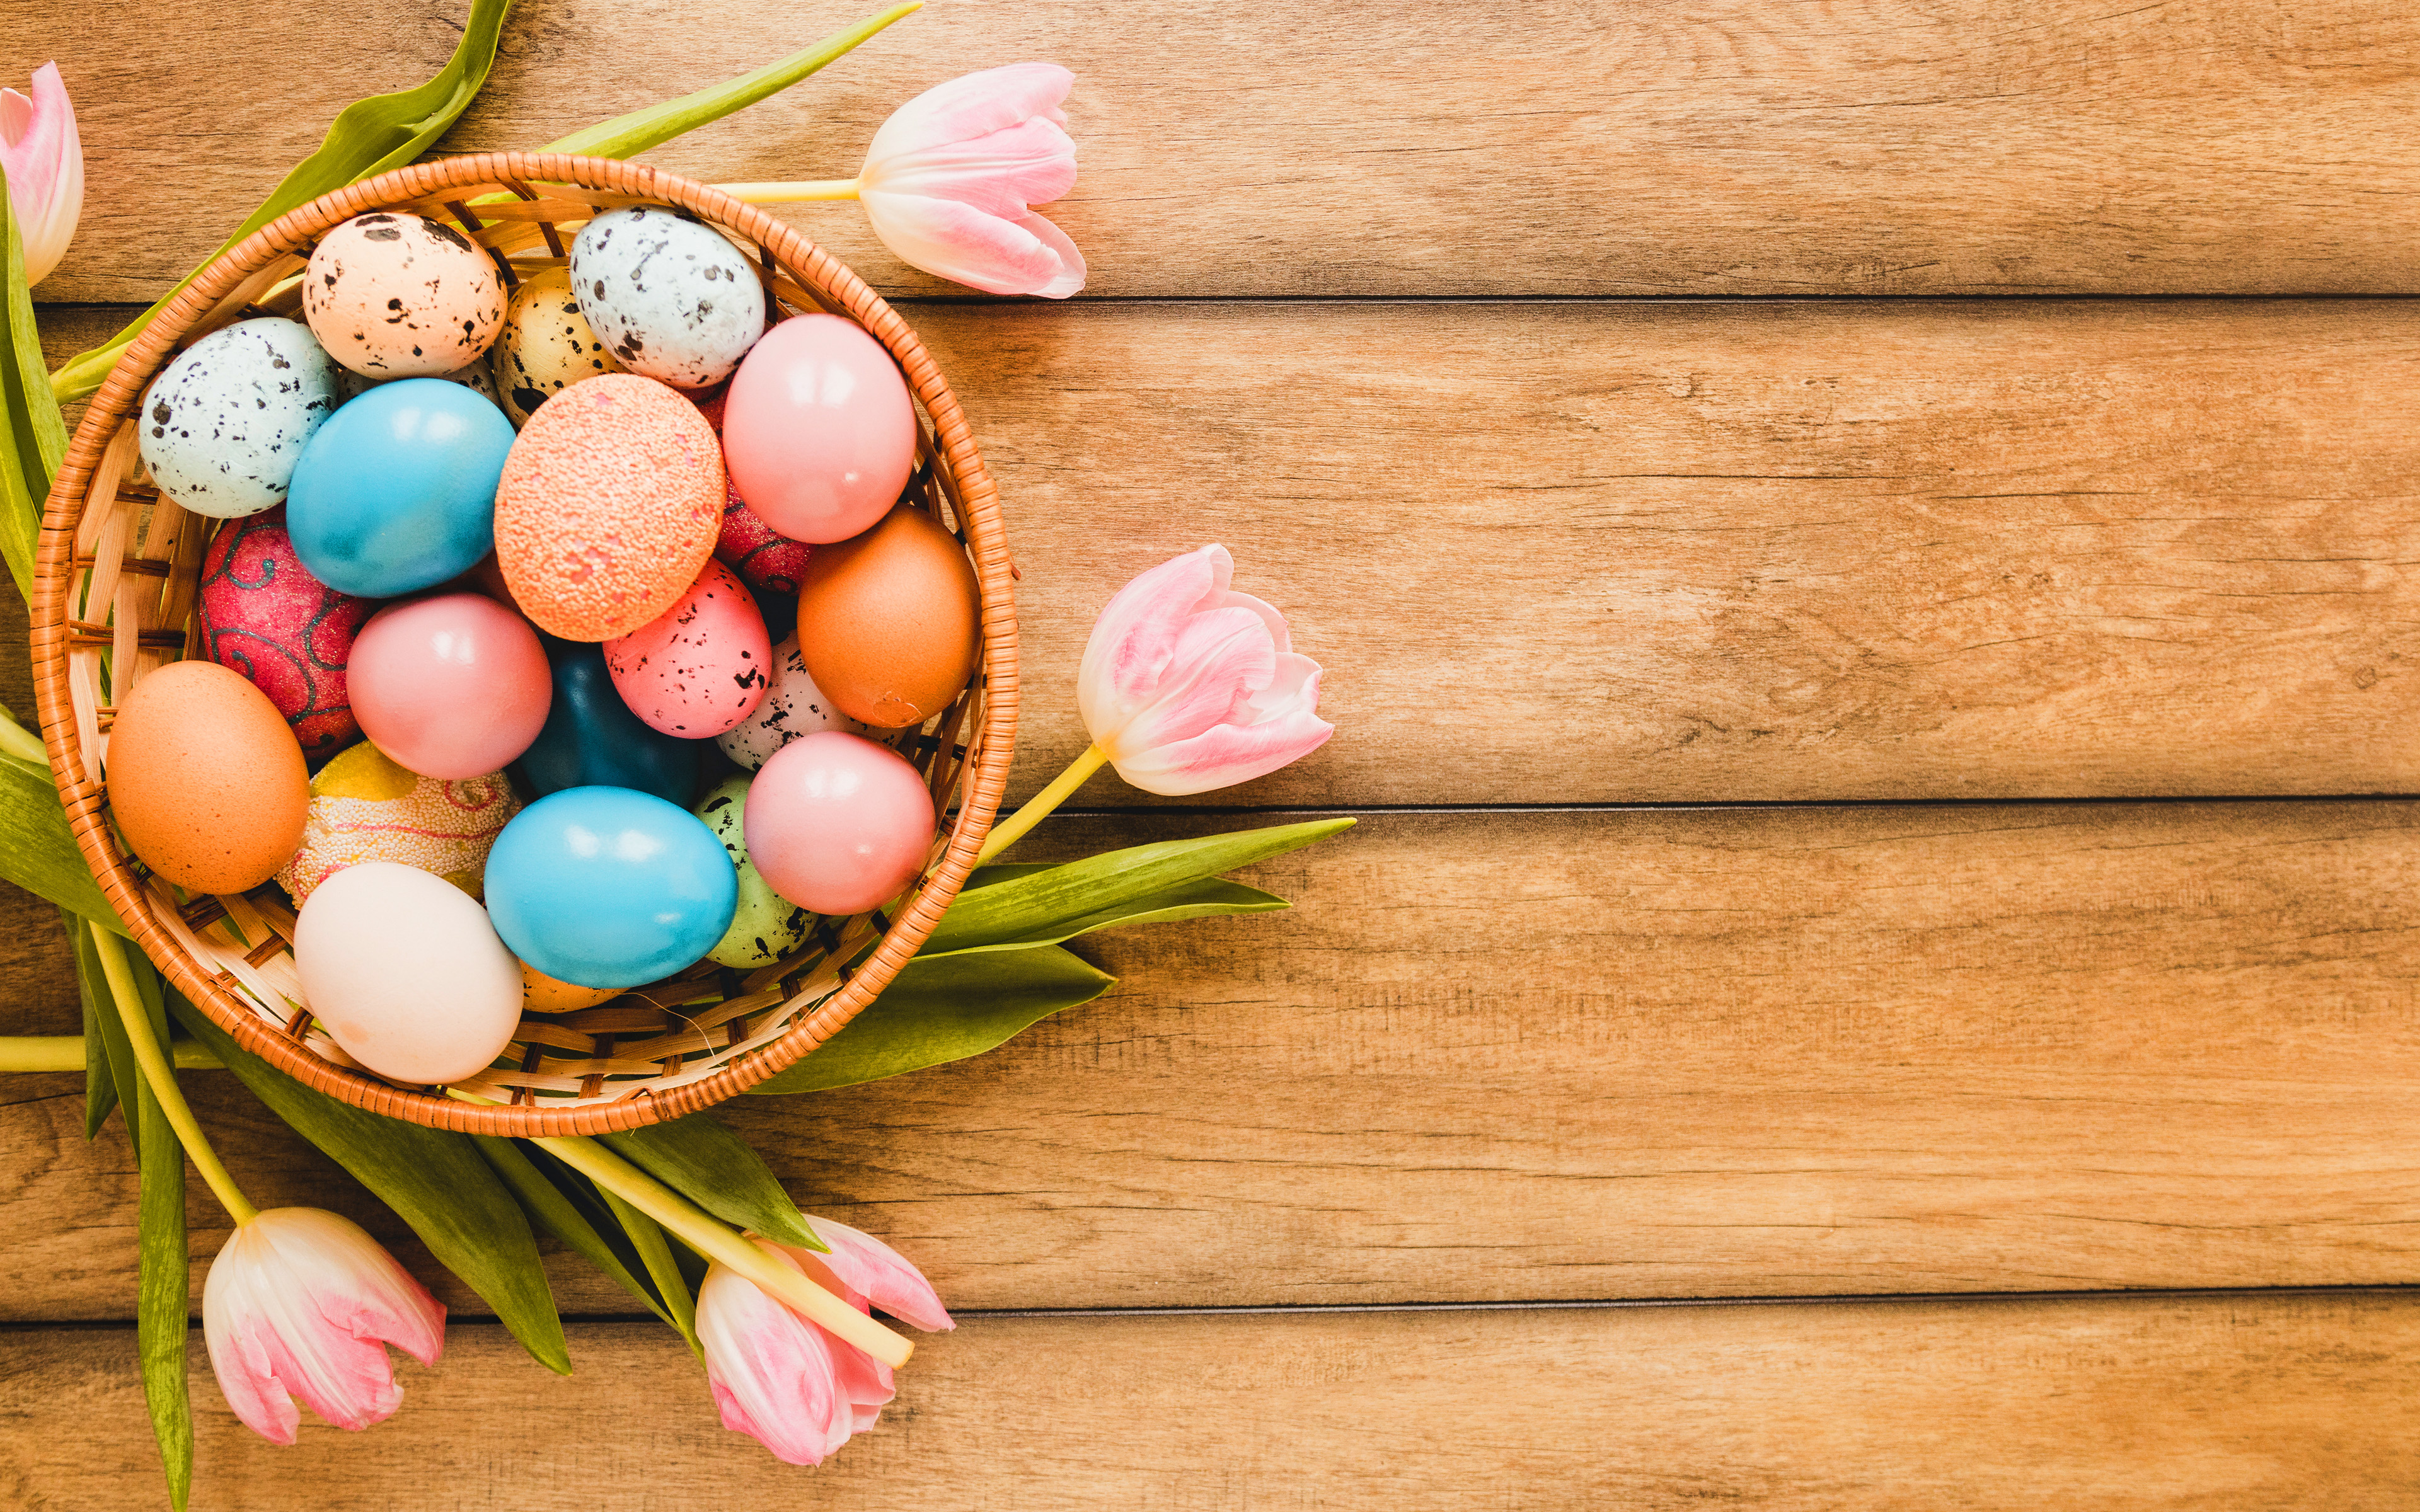 Download wallpaper Easter concepts, 4k, easter eggs, pink tulips, Happy Easter, creative, wooden background, easter attributes, easter frames for desktop with resolution 3840x2400. High Quality HD picture wallpaper